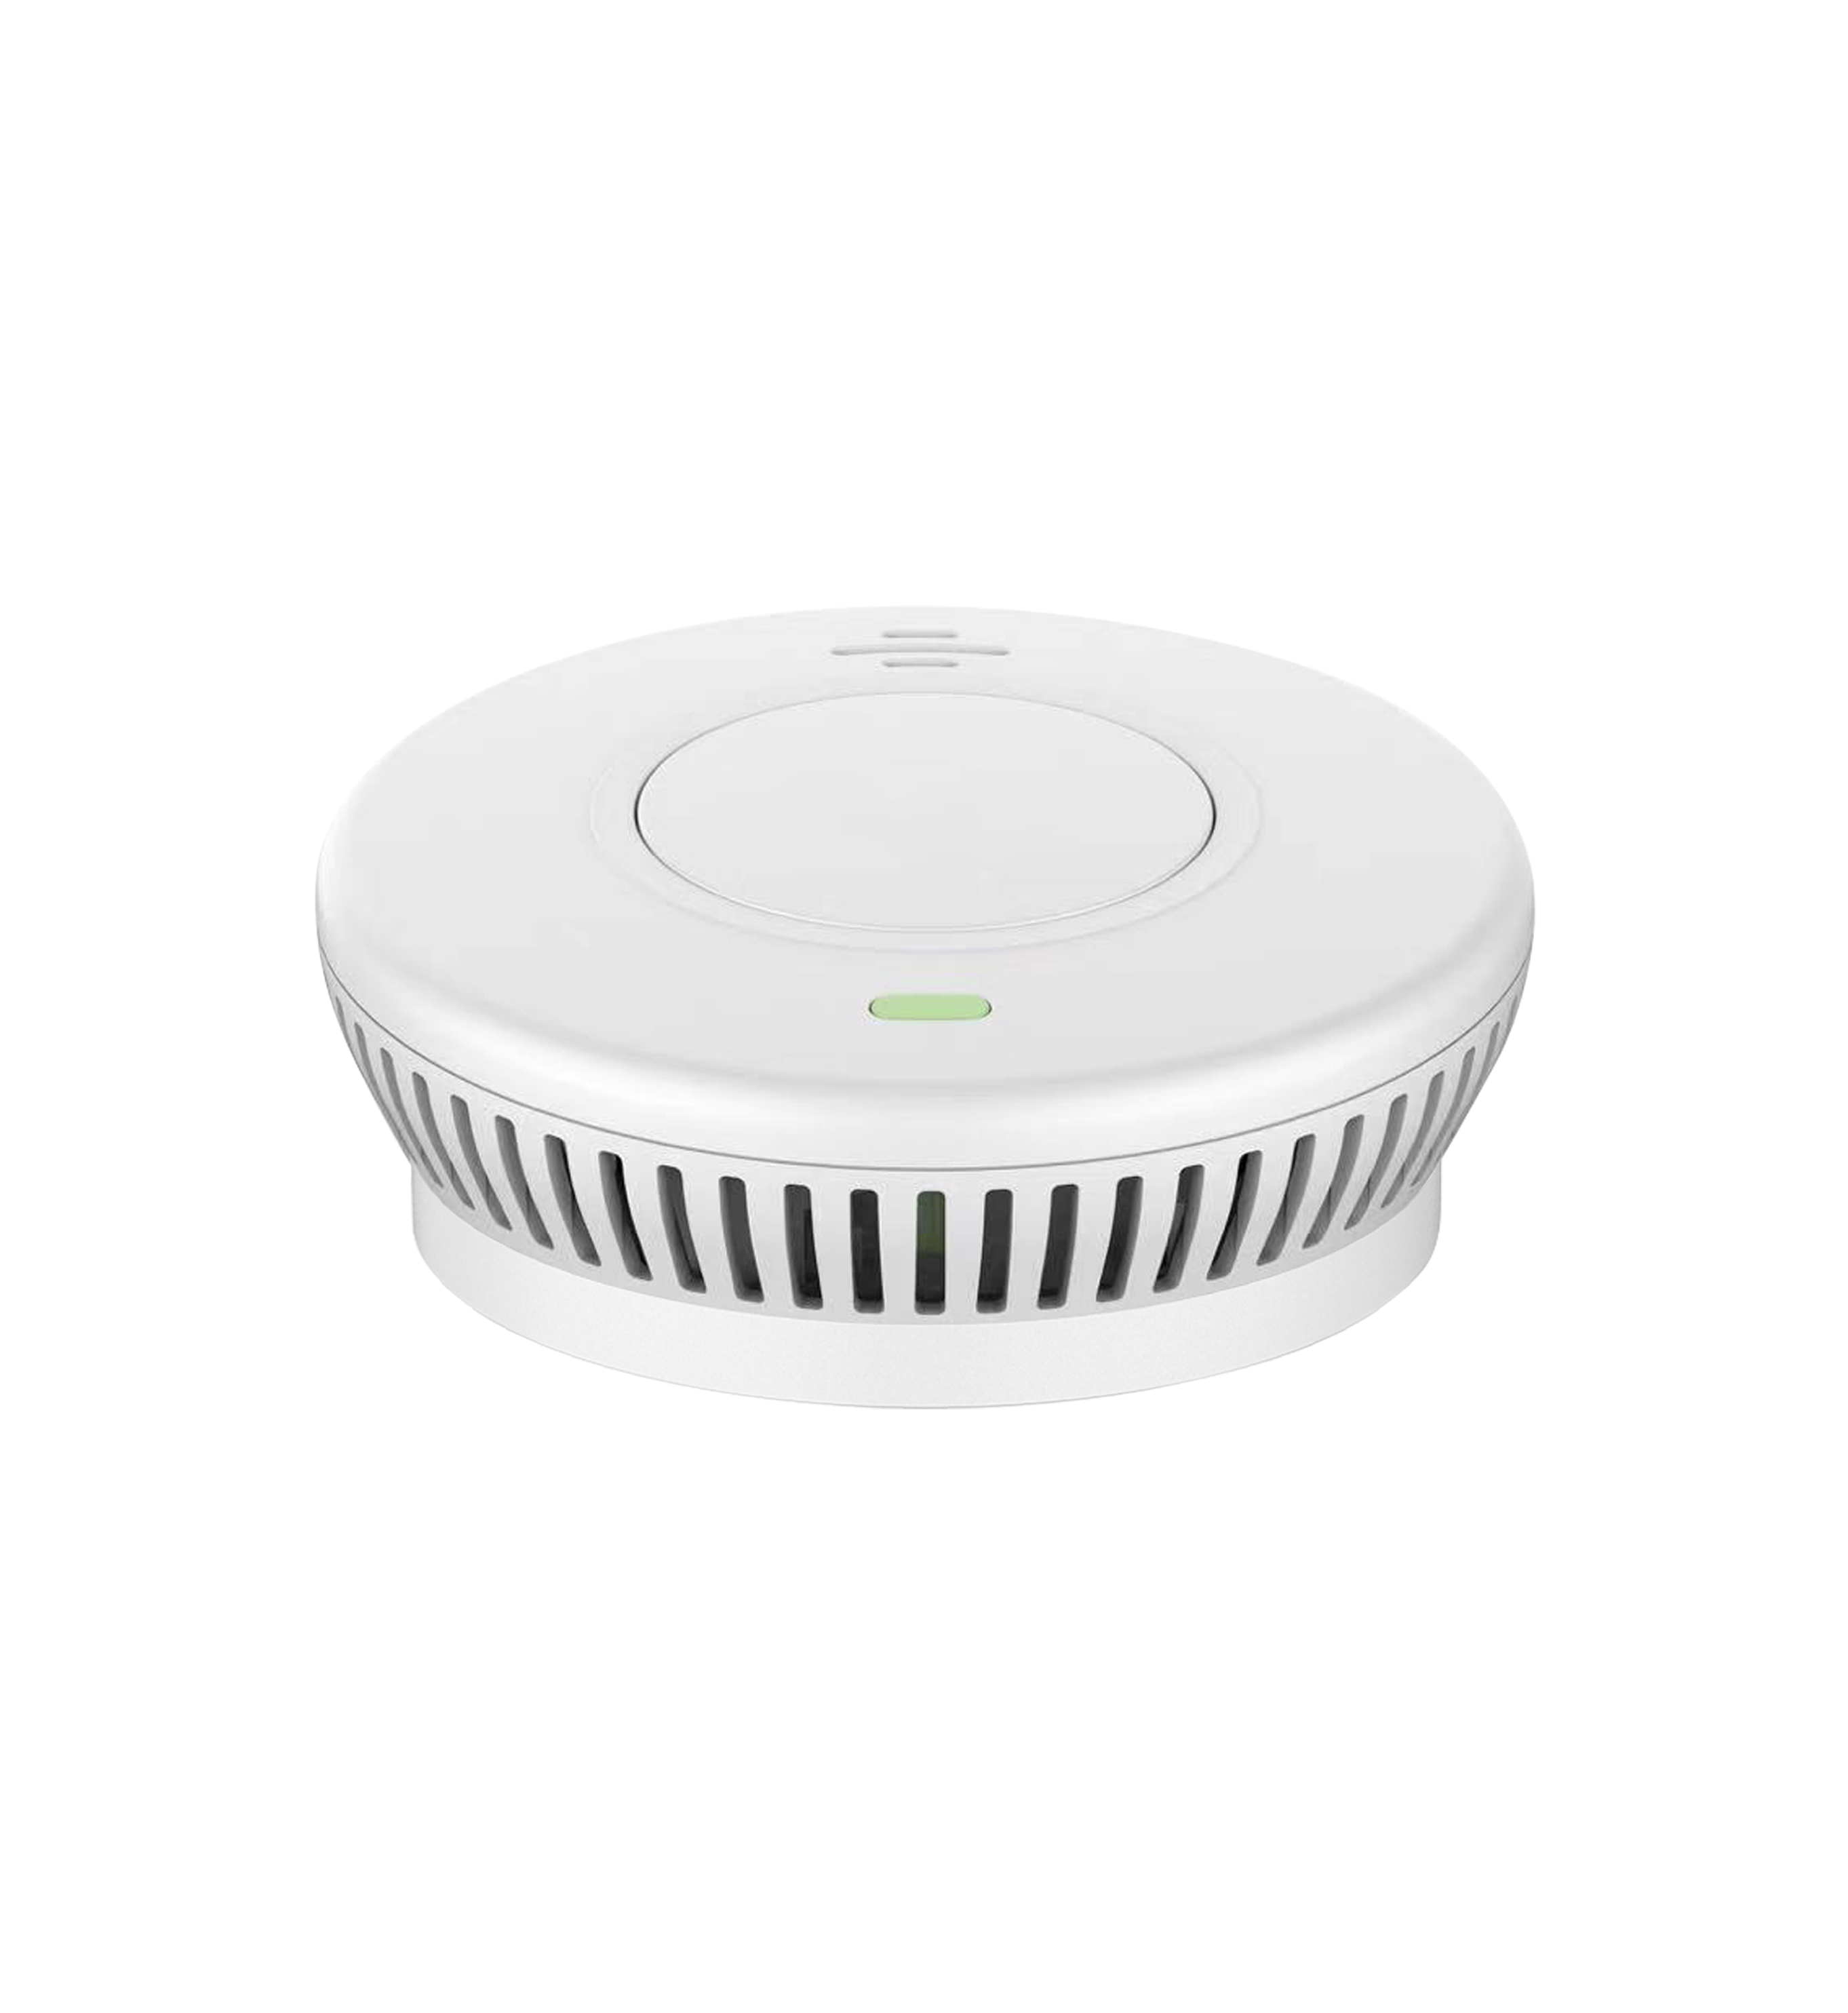 Inter-Connected Smoke Detector-ZR180SR